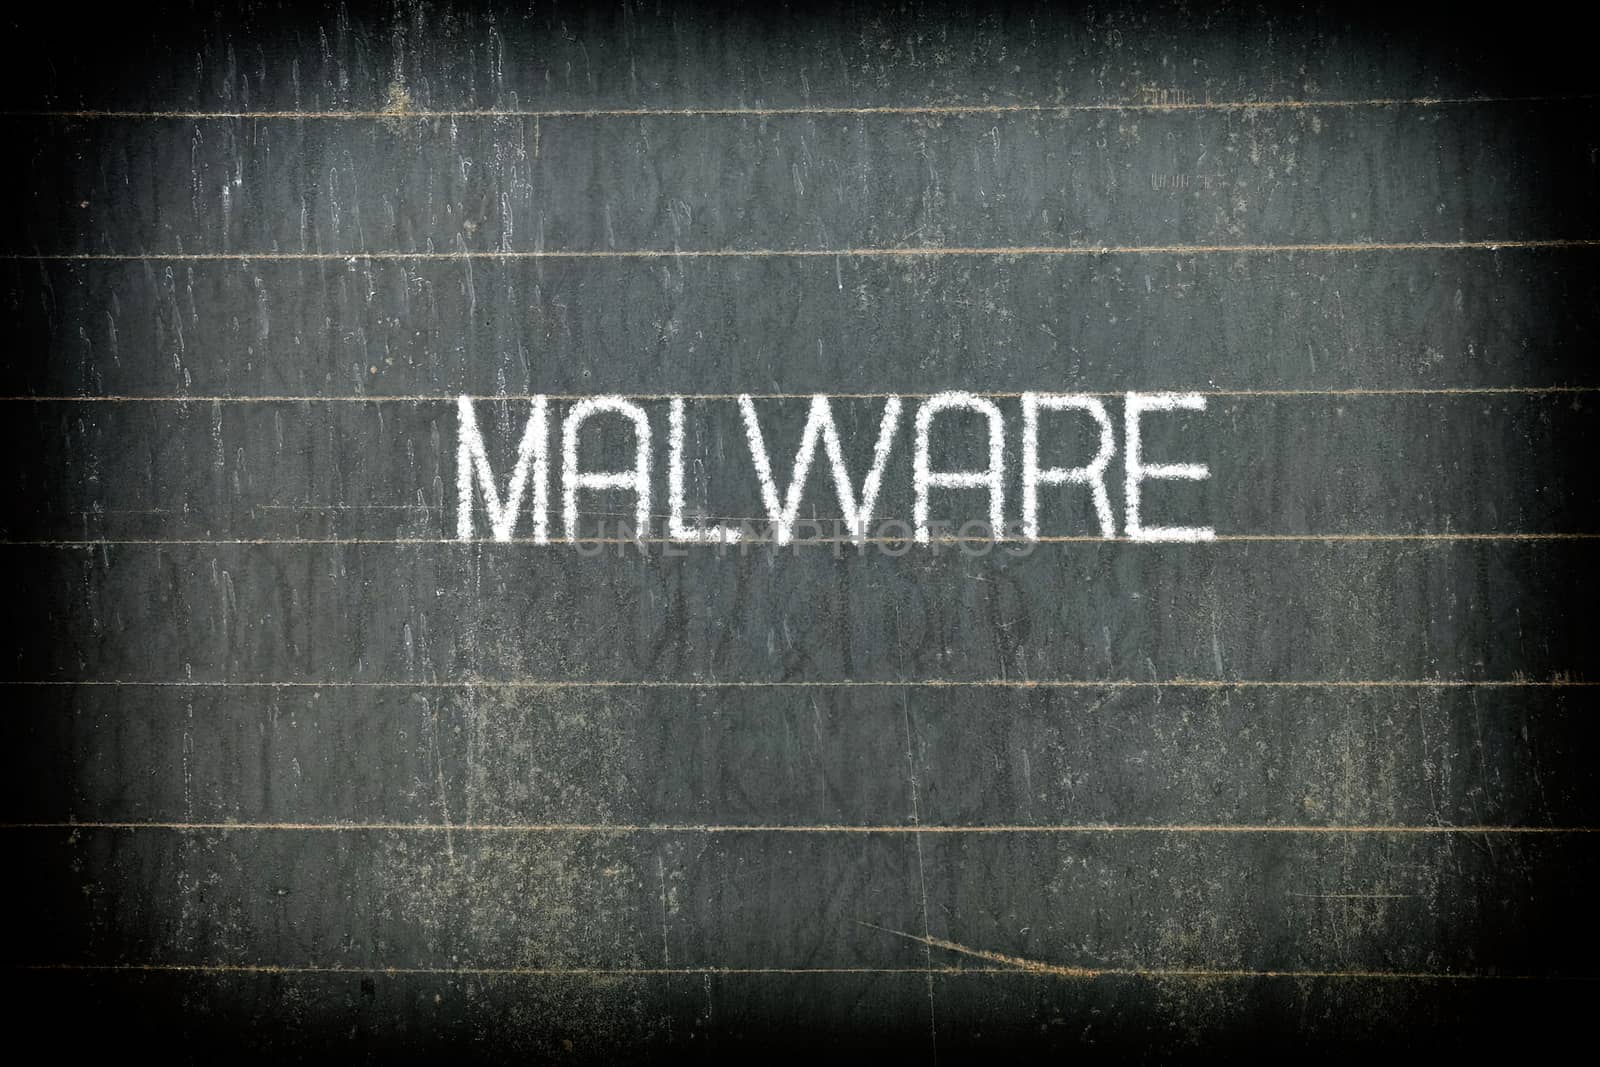 "MALWARE" Chalk Writing on Old Chalkboard Background. by mesamong